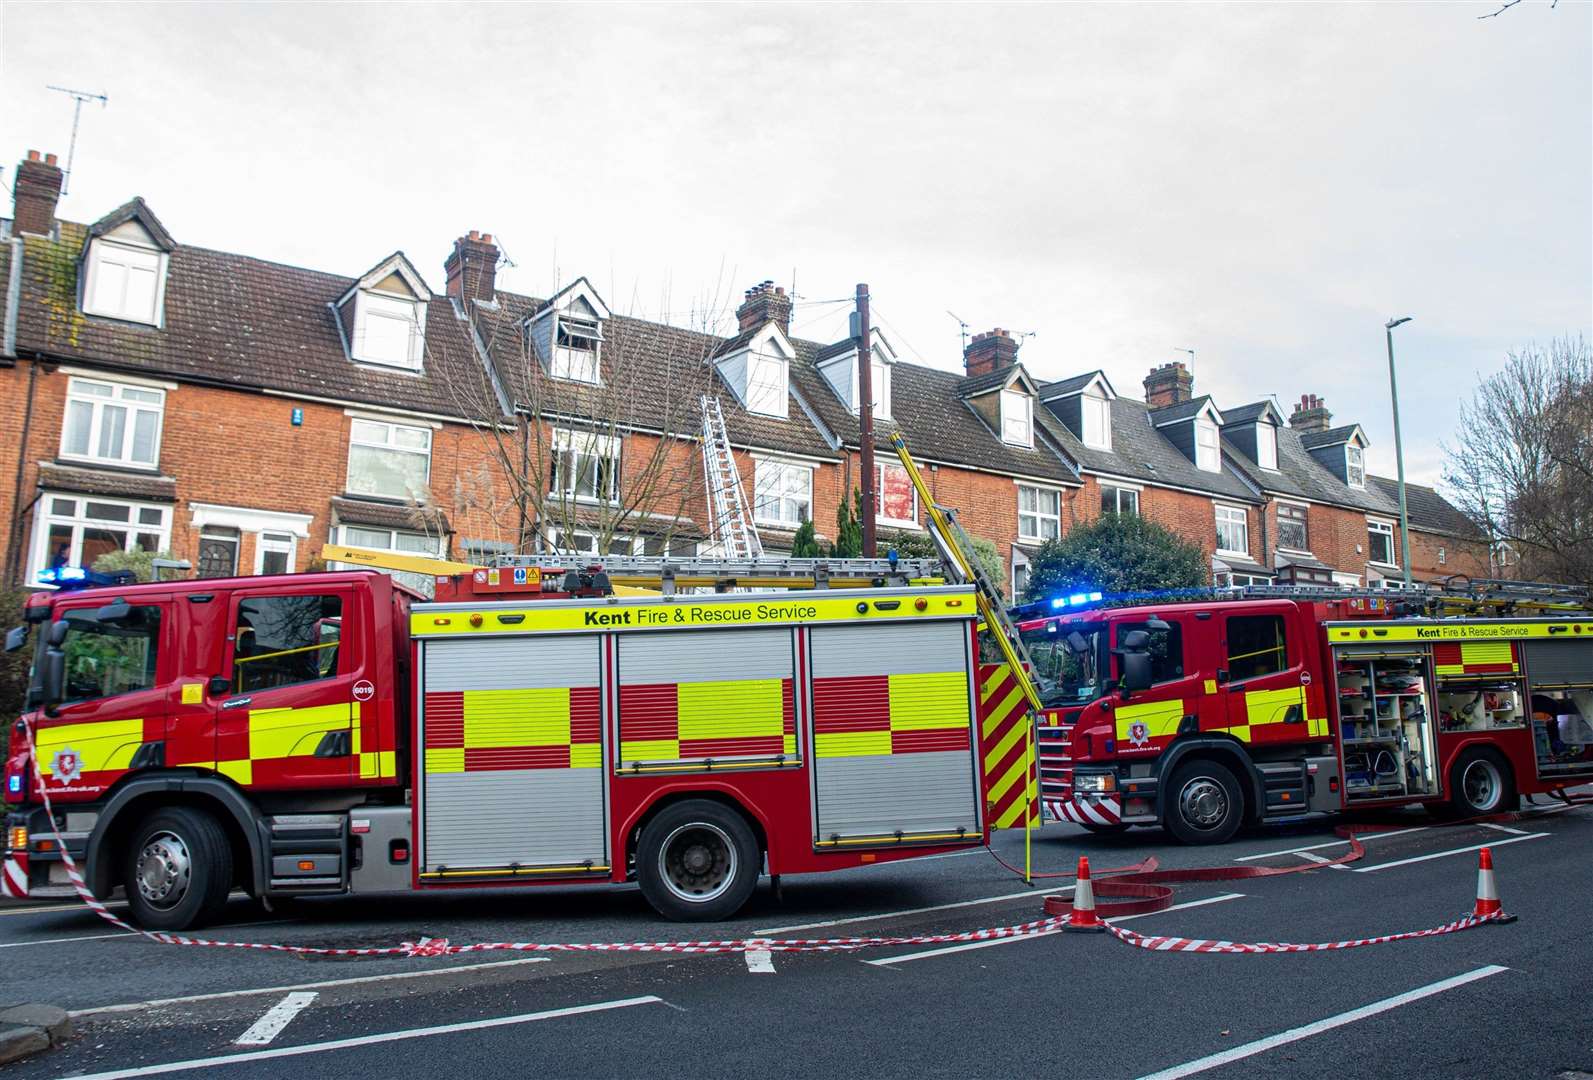 Firefighters attended the incident at Loose Road, Maidstone